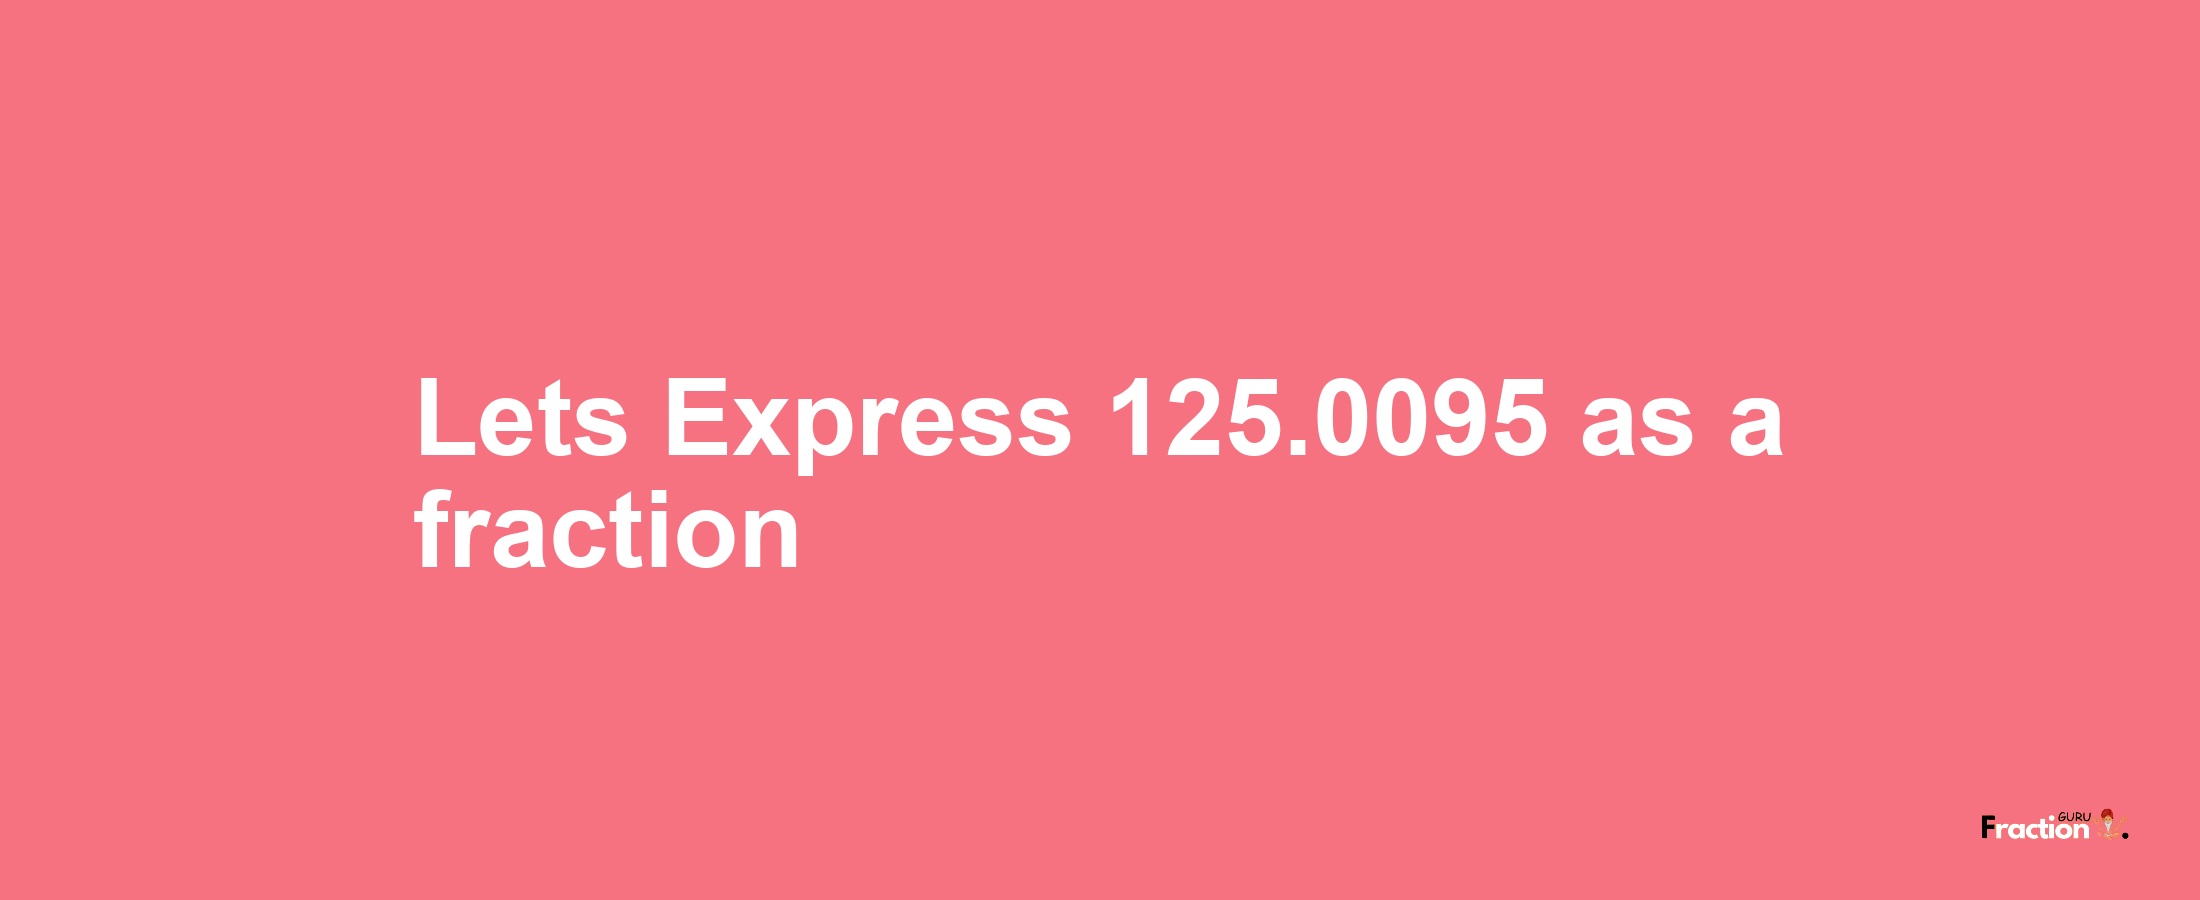 Lets Express 125.0095 as afraction